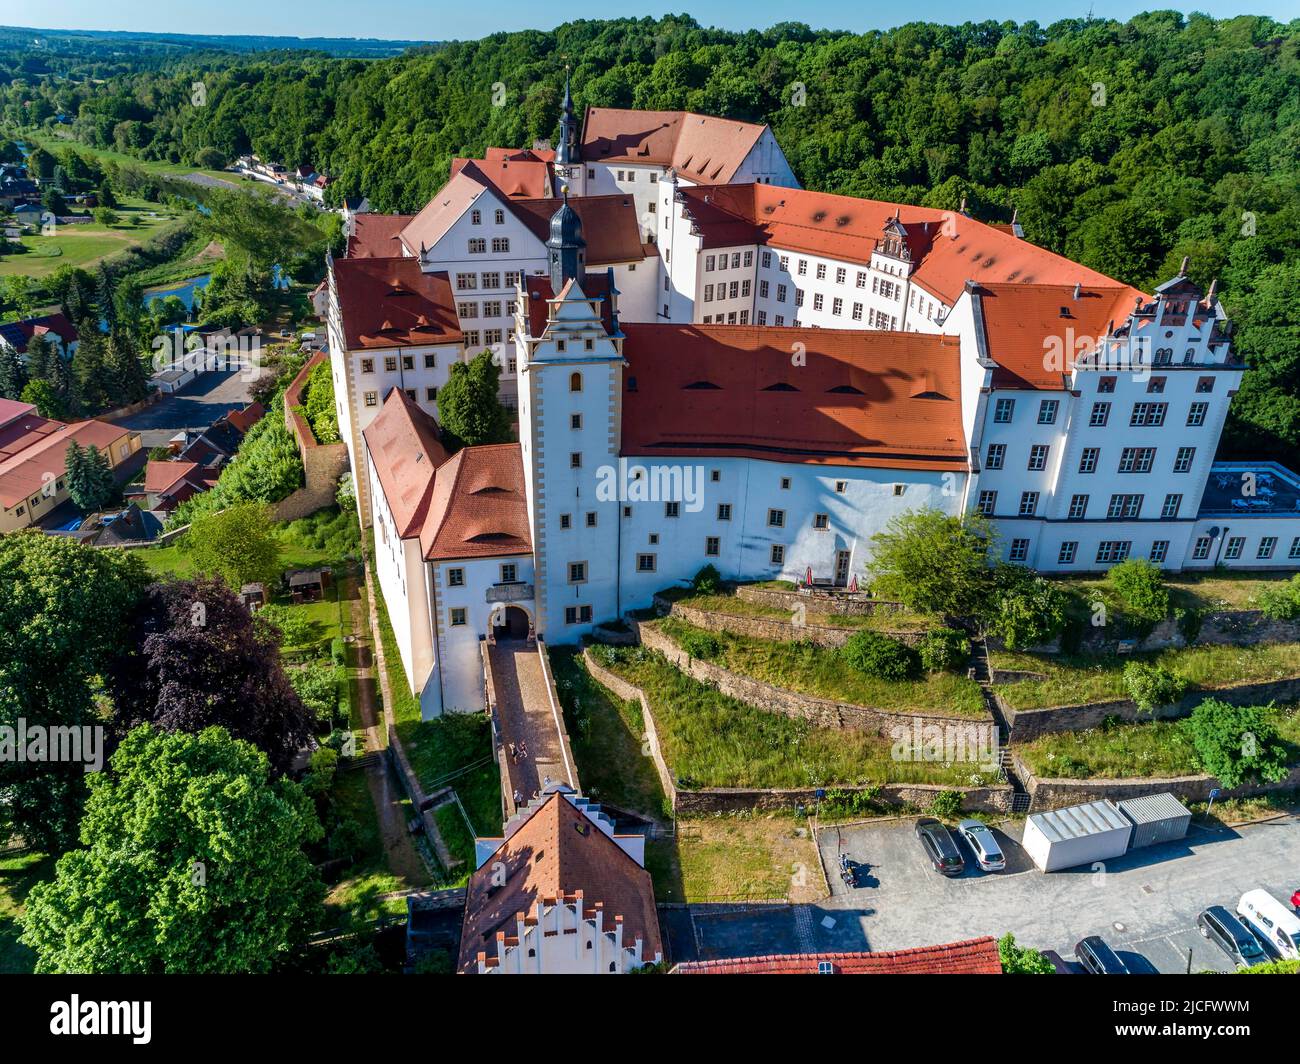 Colditz Castle is a Renaissance castle in Colditz in Central Saxony and gained international fame through its use as a prisoner of war camp for Allied officers during World War II. Stock Photo